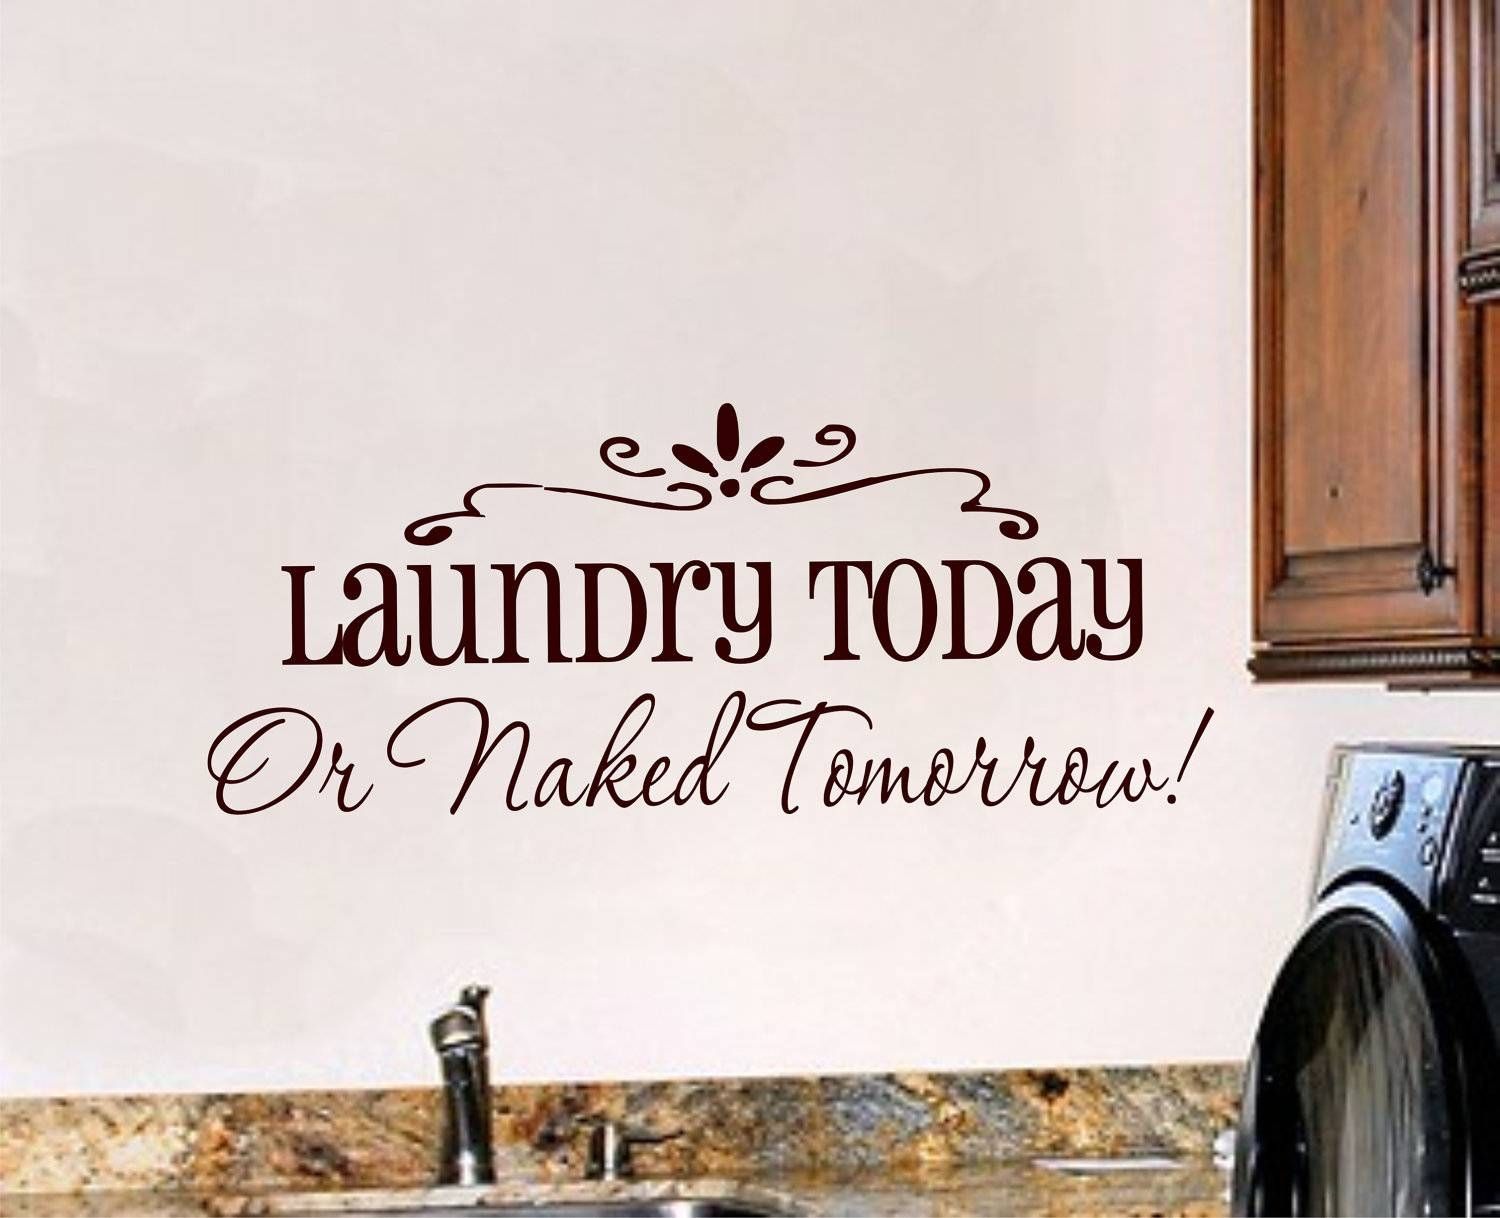 Laundry Room Wall Decal Laundry Room Decor Vinyl Wall Art Pertaining To Most Recent Laundry Room Wall Art (Gallery 18 of 30)